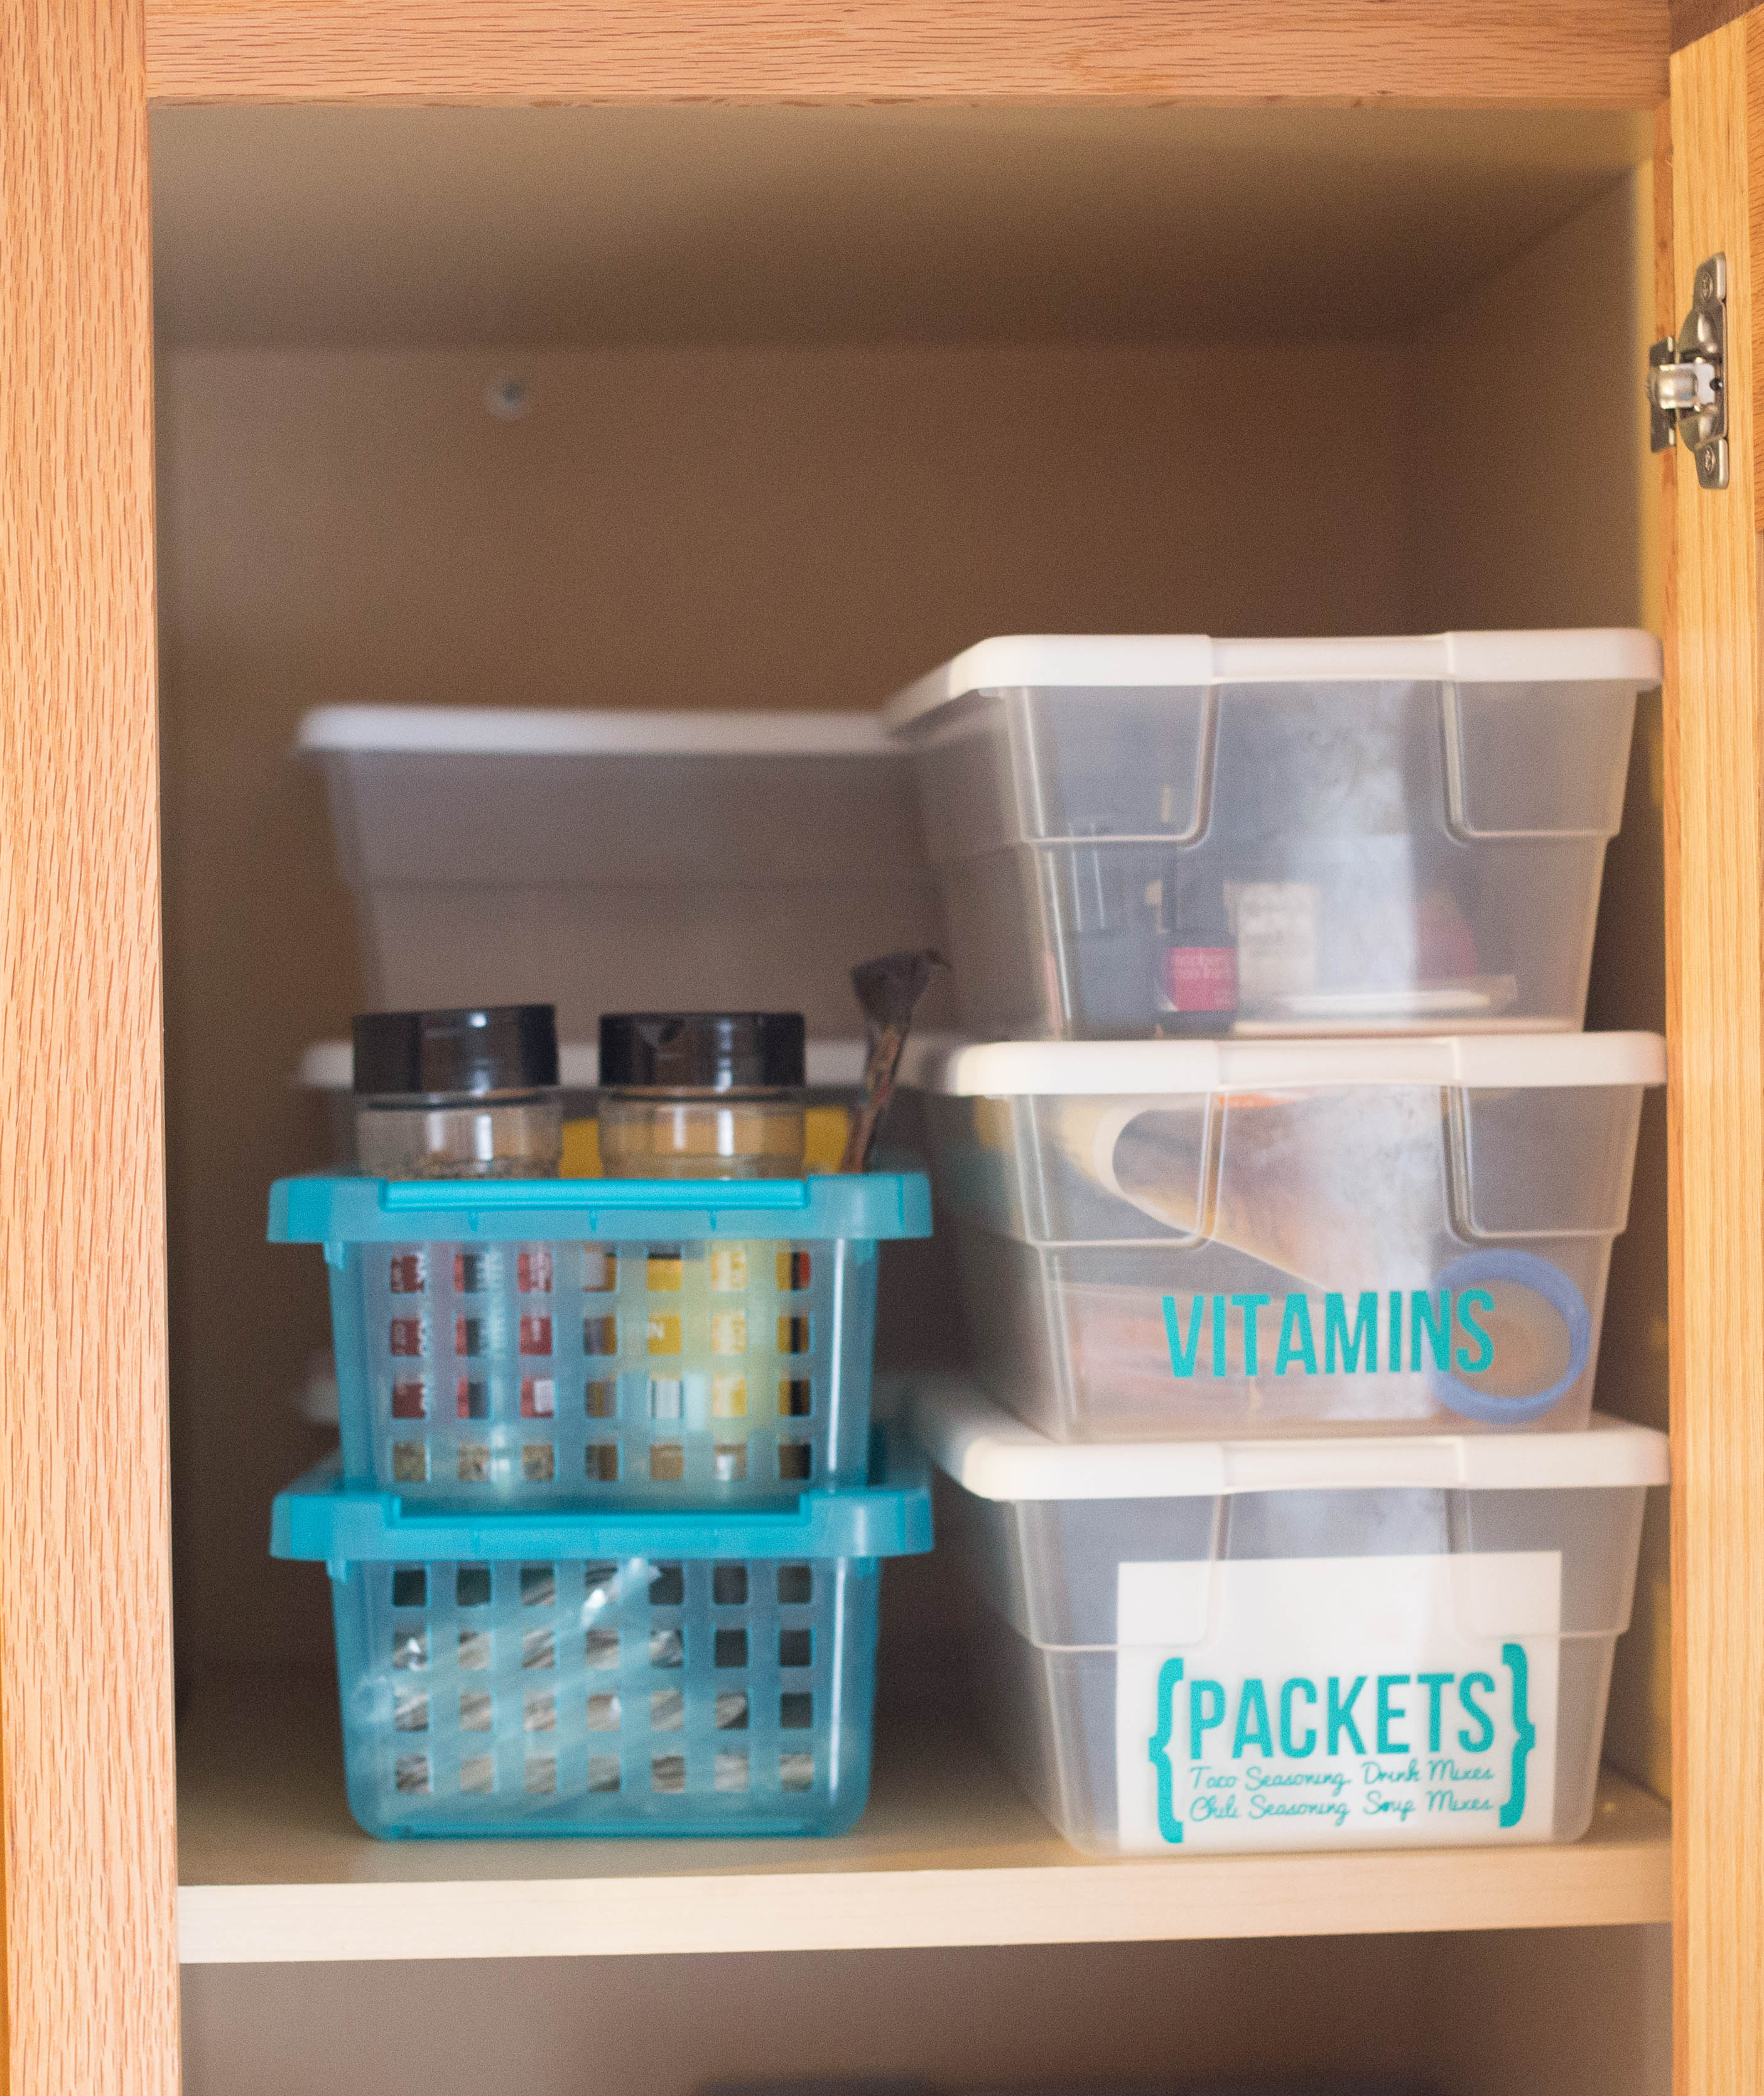 Dollar Tree Spice Cabinet Organization - Full Hearted Home